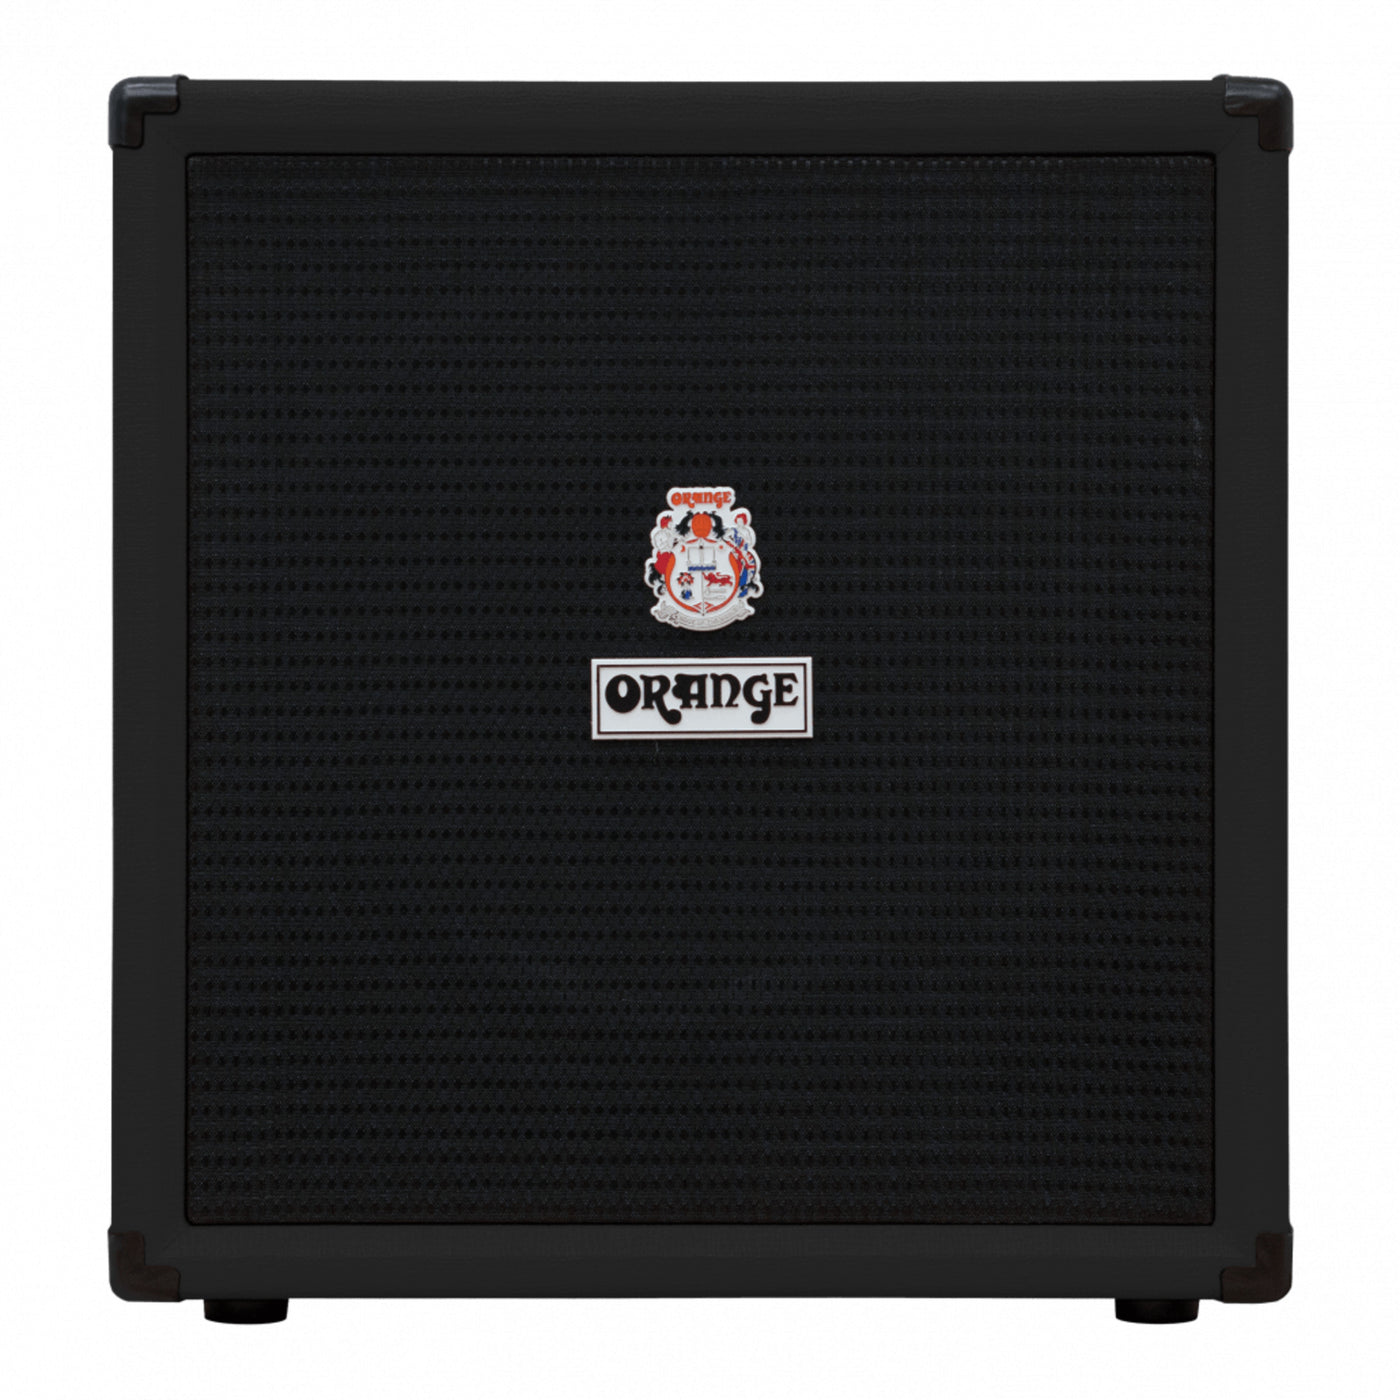 Orange Amps Crush Bass 100 Amp, 100-Watts, All-Analog with Buffered Effects Loop- Black - CRUSHBASS50